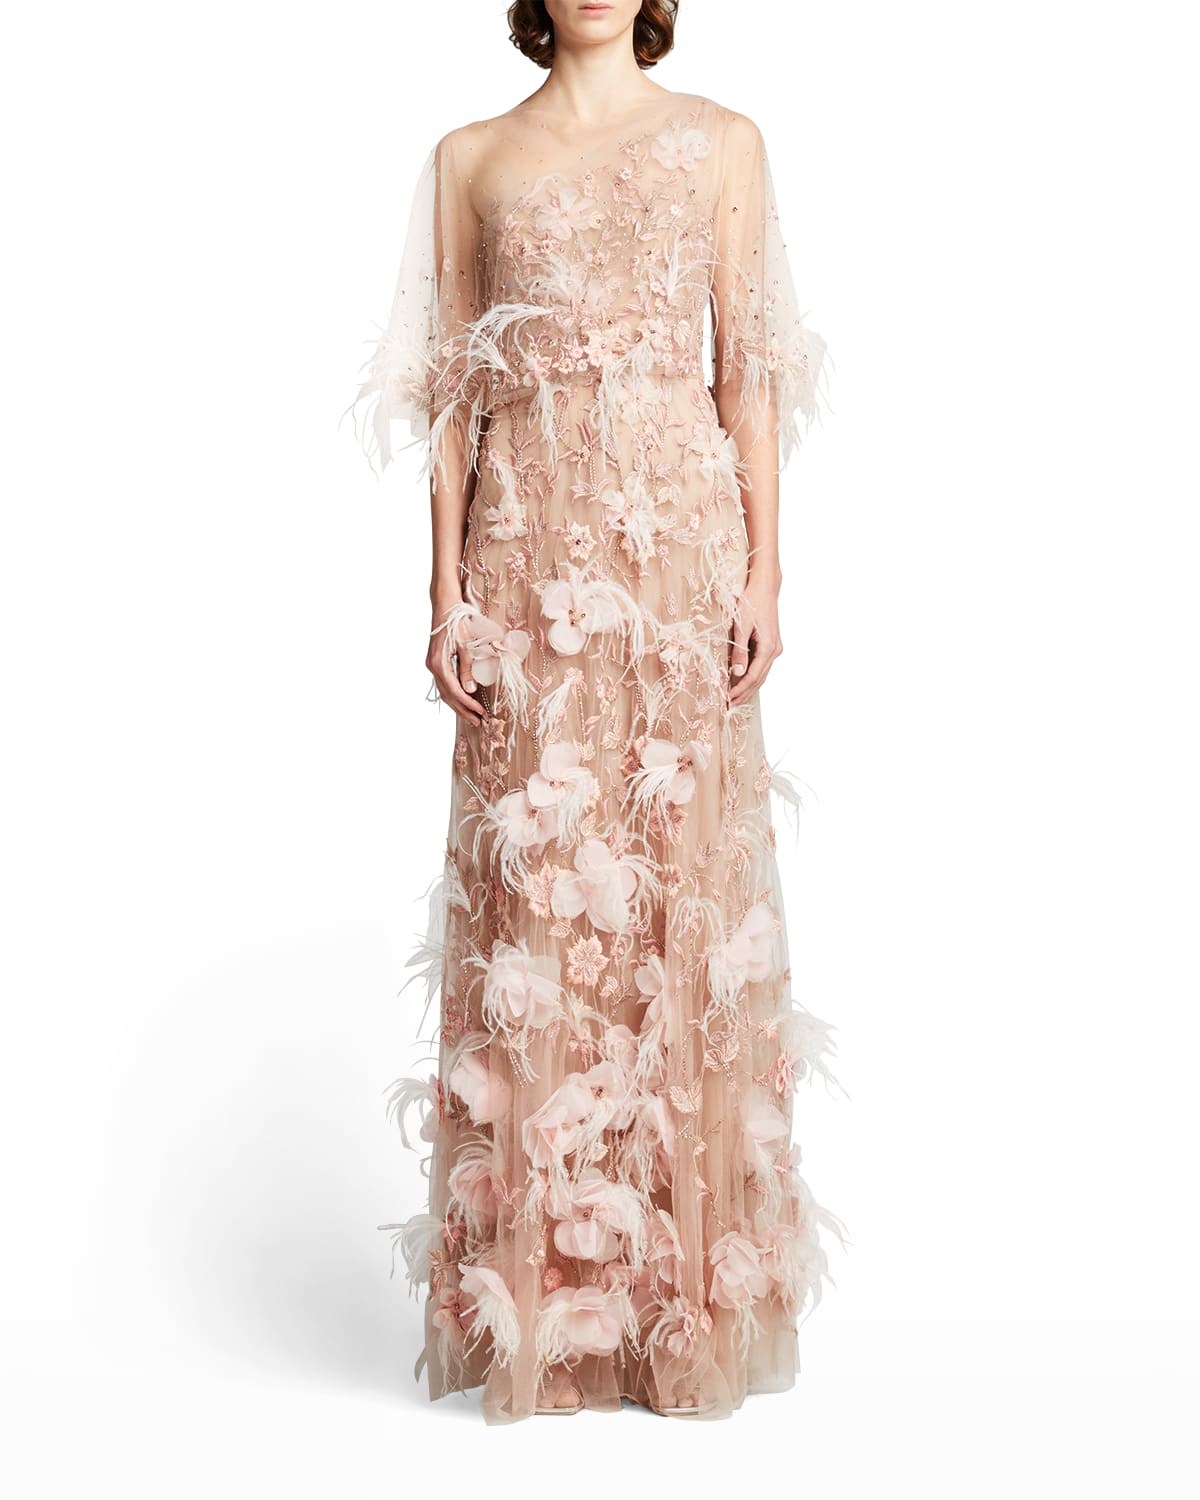 MARCHESA FLORAL & FEATHER EMBELLISHED ILLUSION GOWN